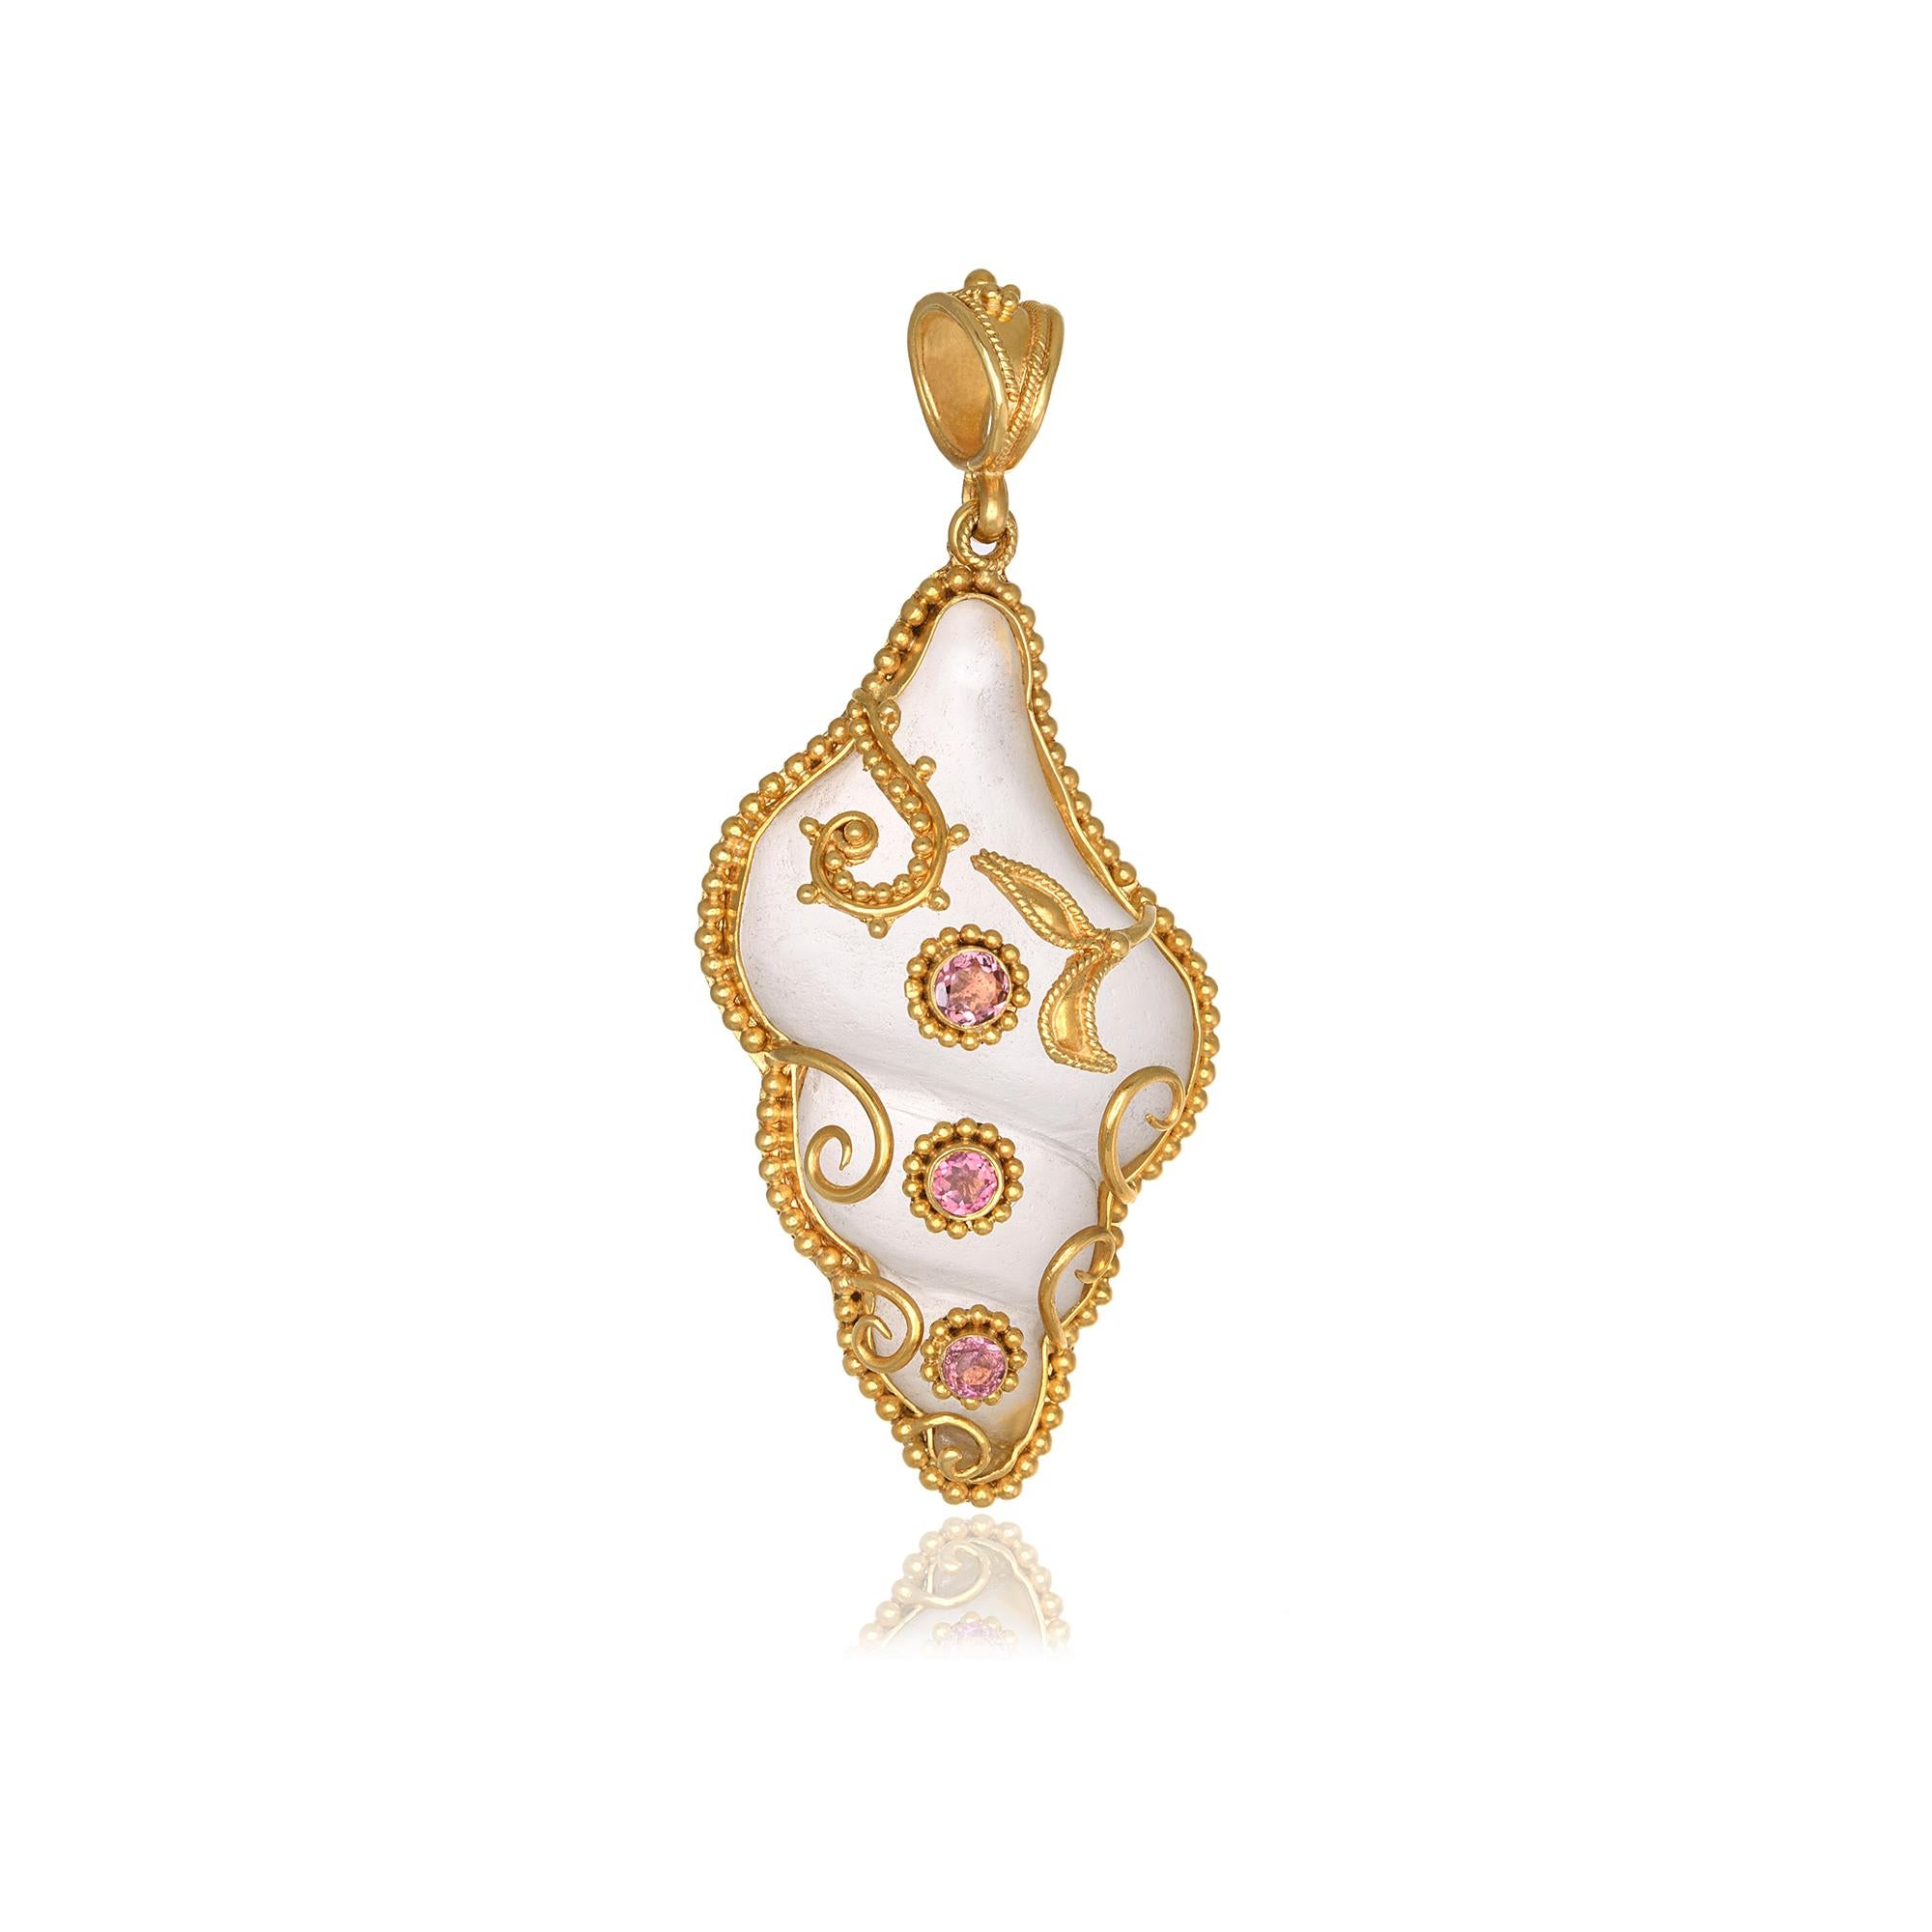 Shell Shape carved rock crystal Pendant necklace, handcrafted in 22Kt yellow gold, featuring round Tourmalines. This breathtaking jewelry piece is braided according to the ancestral techniques of granulation and filigree. The delicate and intricate